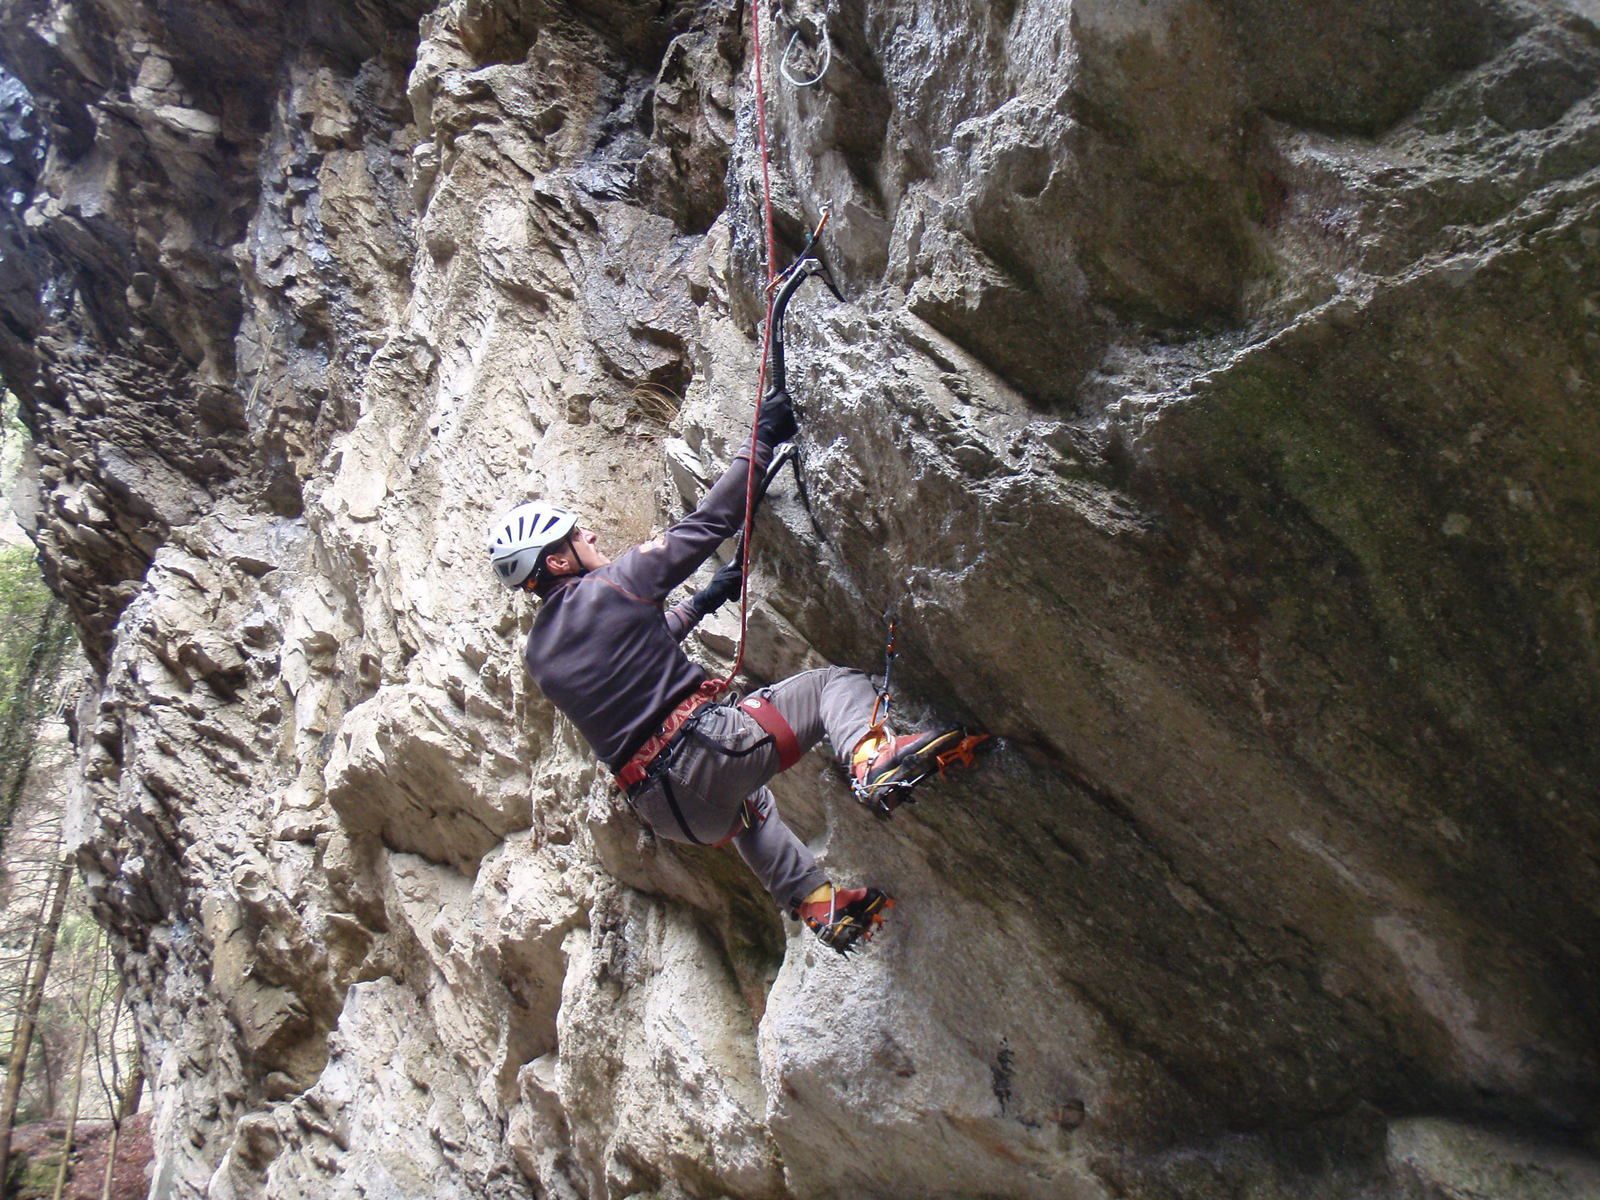 Les Thermes du Fayet; Dry-tooling